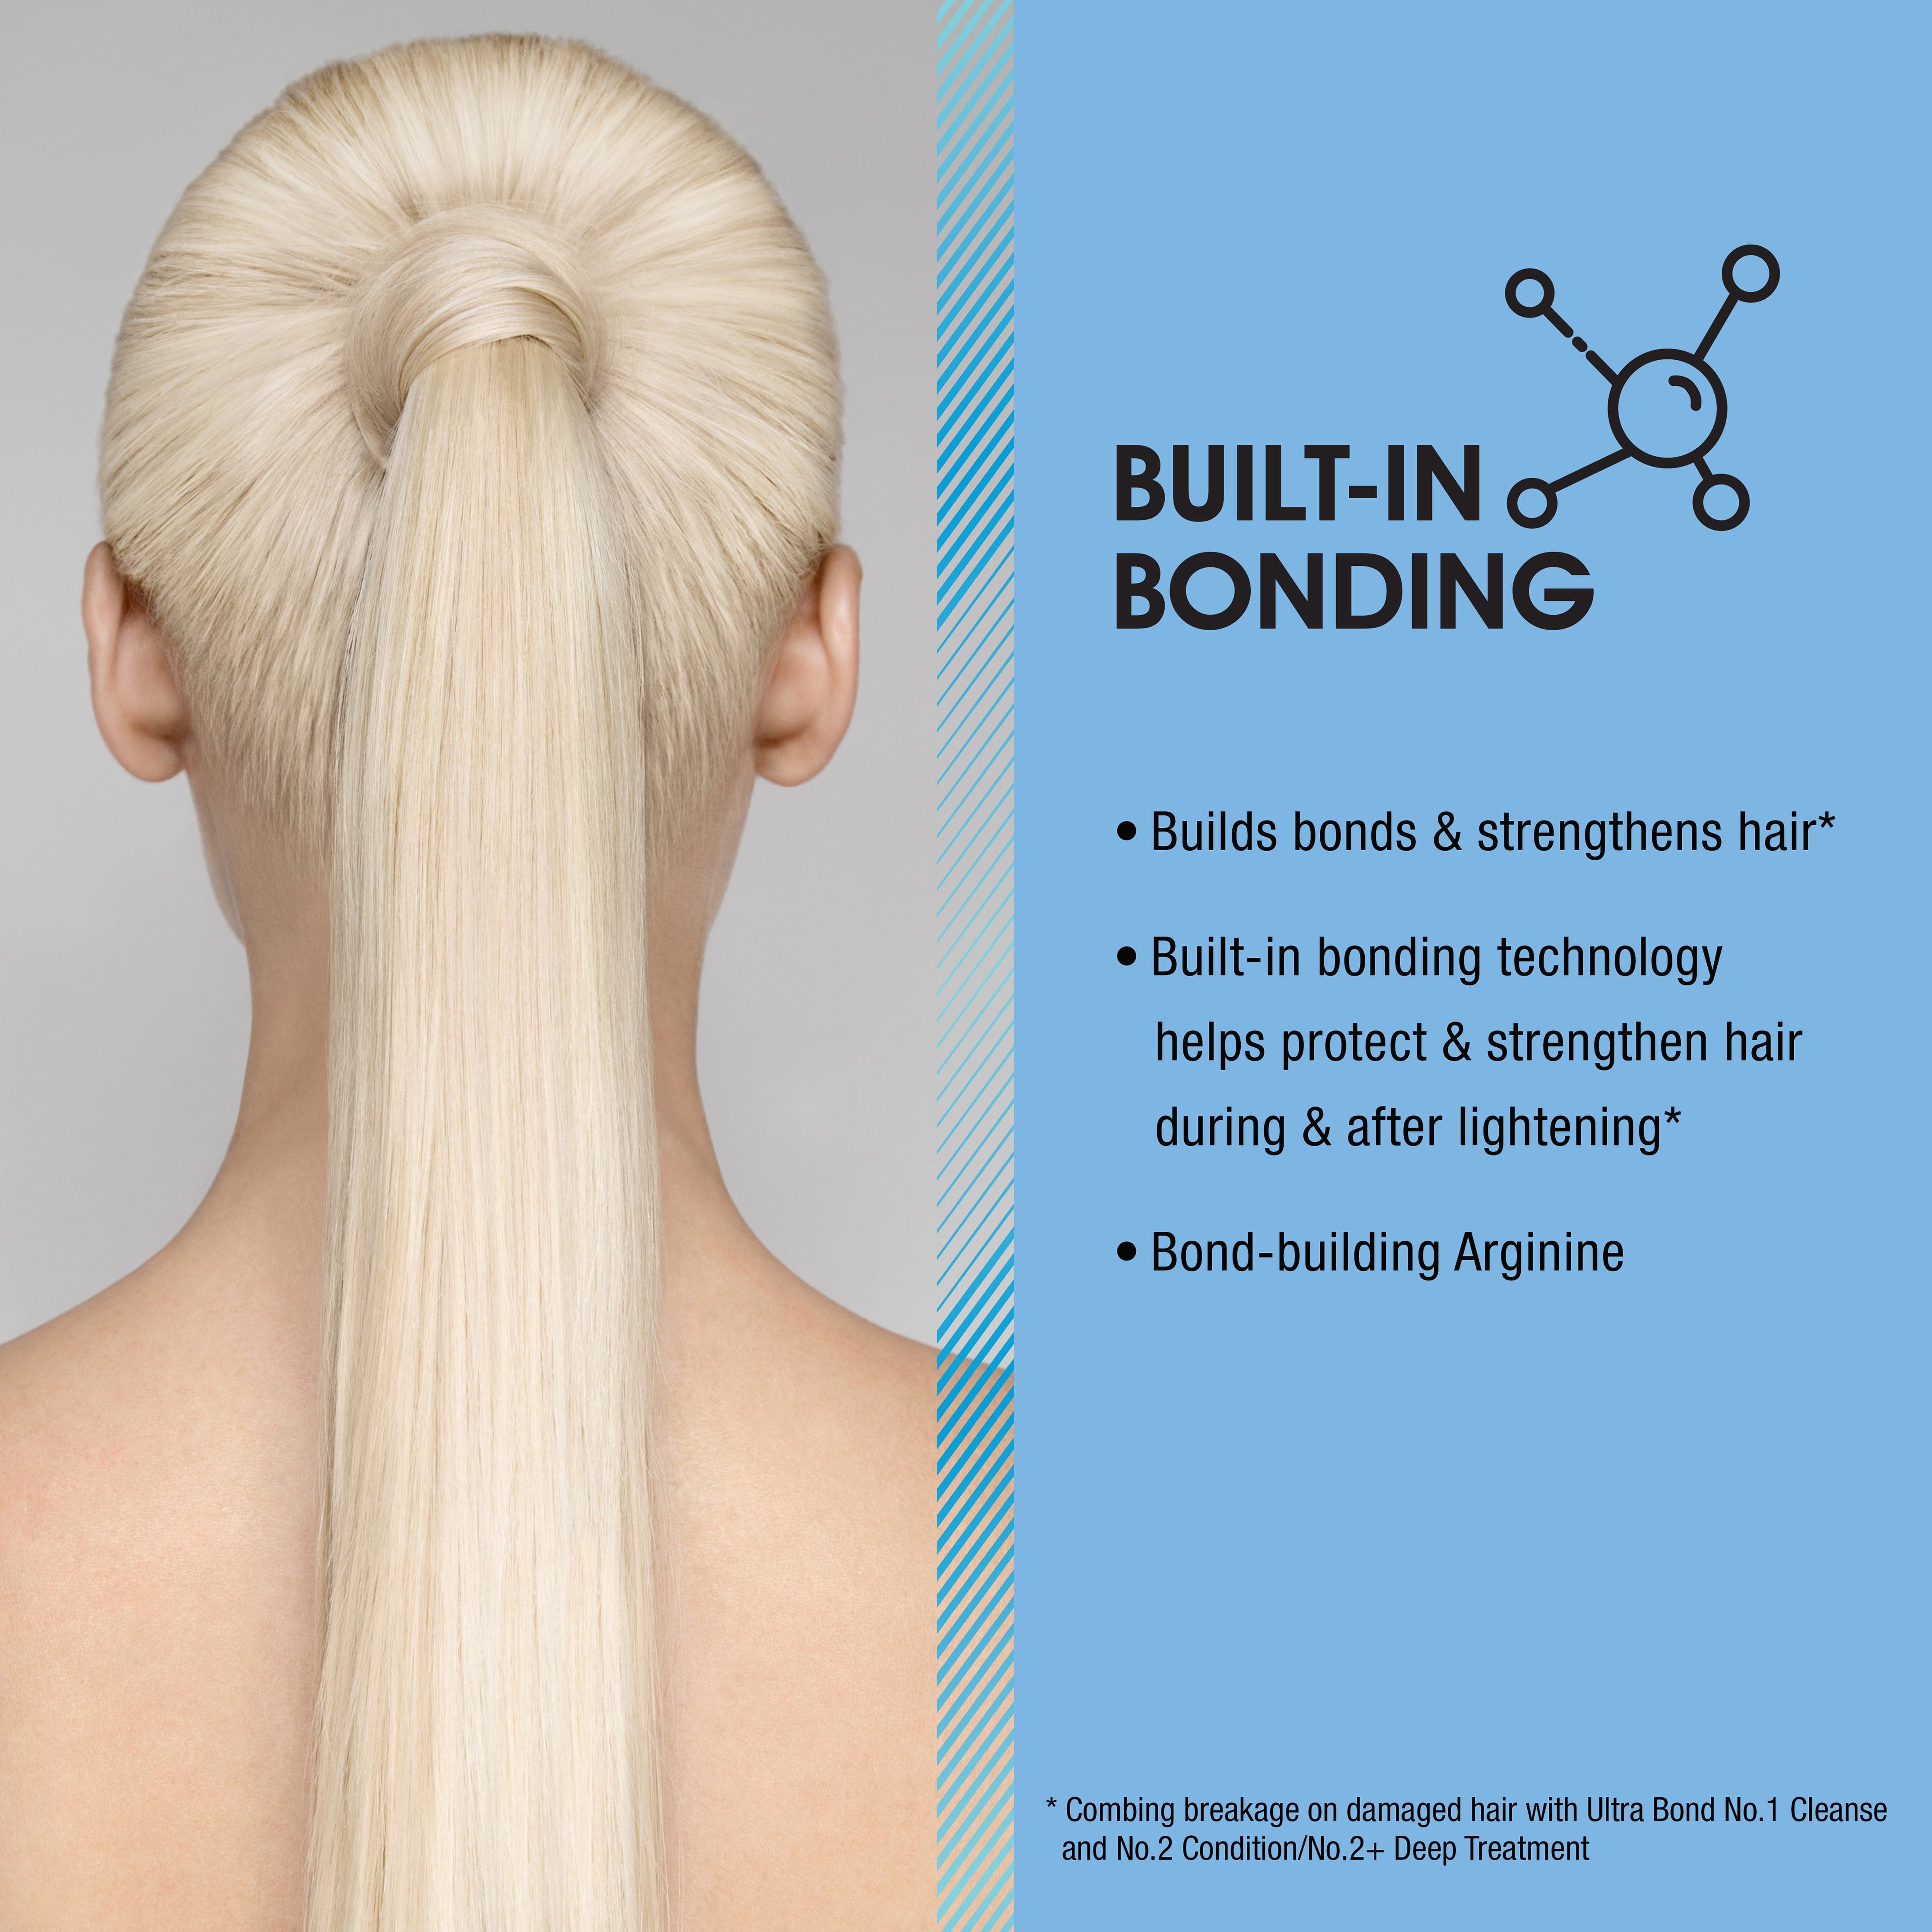 AGEbeautiful® Ultra Bond™ No. 1 Blonde Care Purple Conditioner+ has built in bonding to help protect and strengthen hair during & after lightening